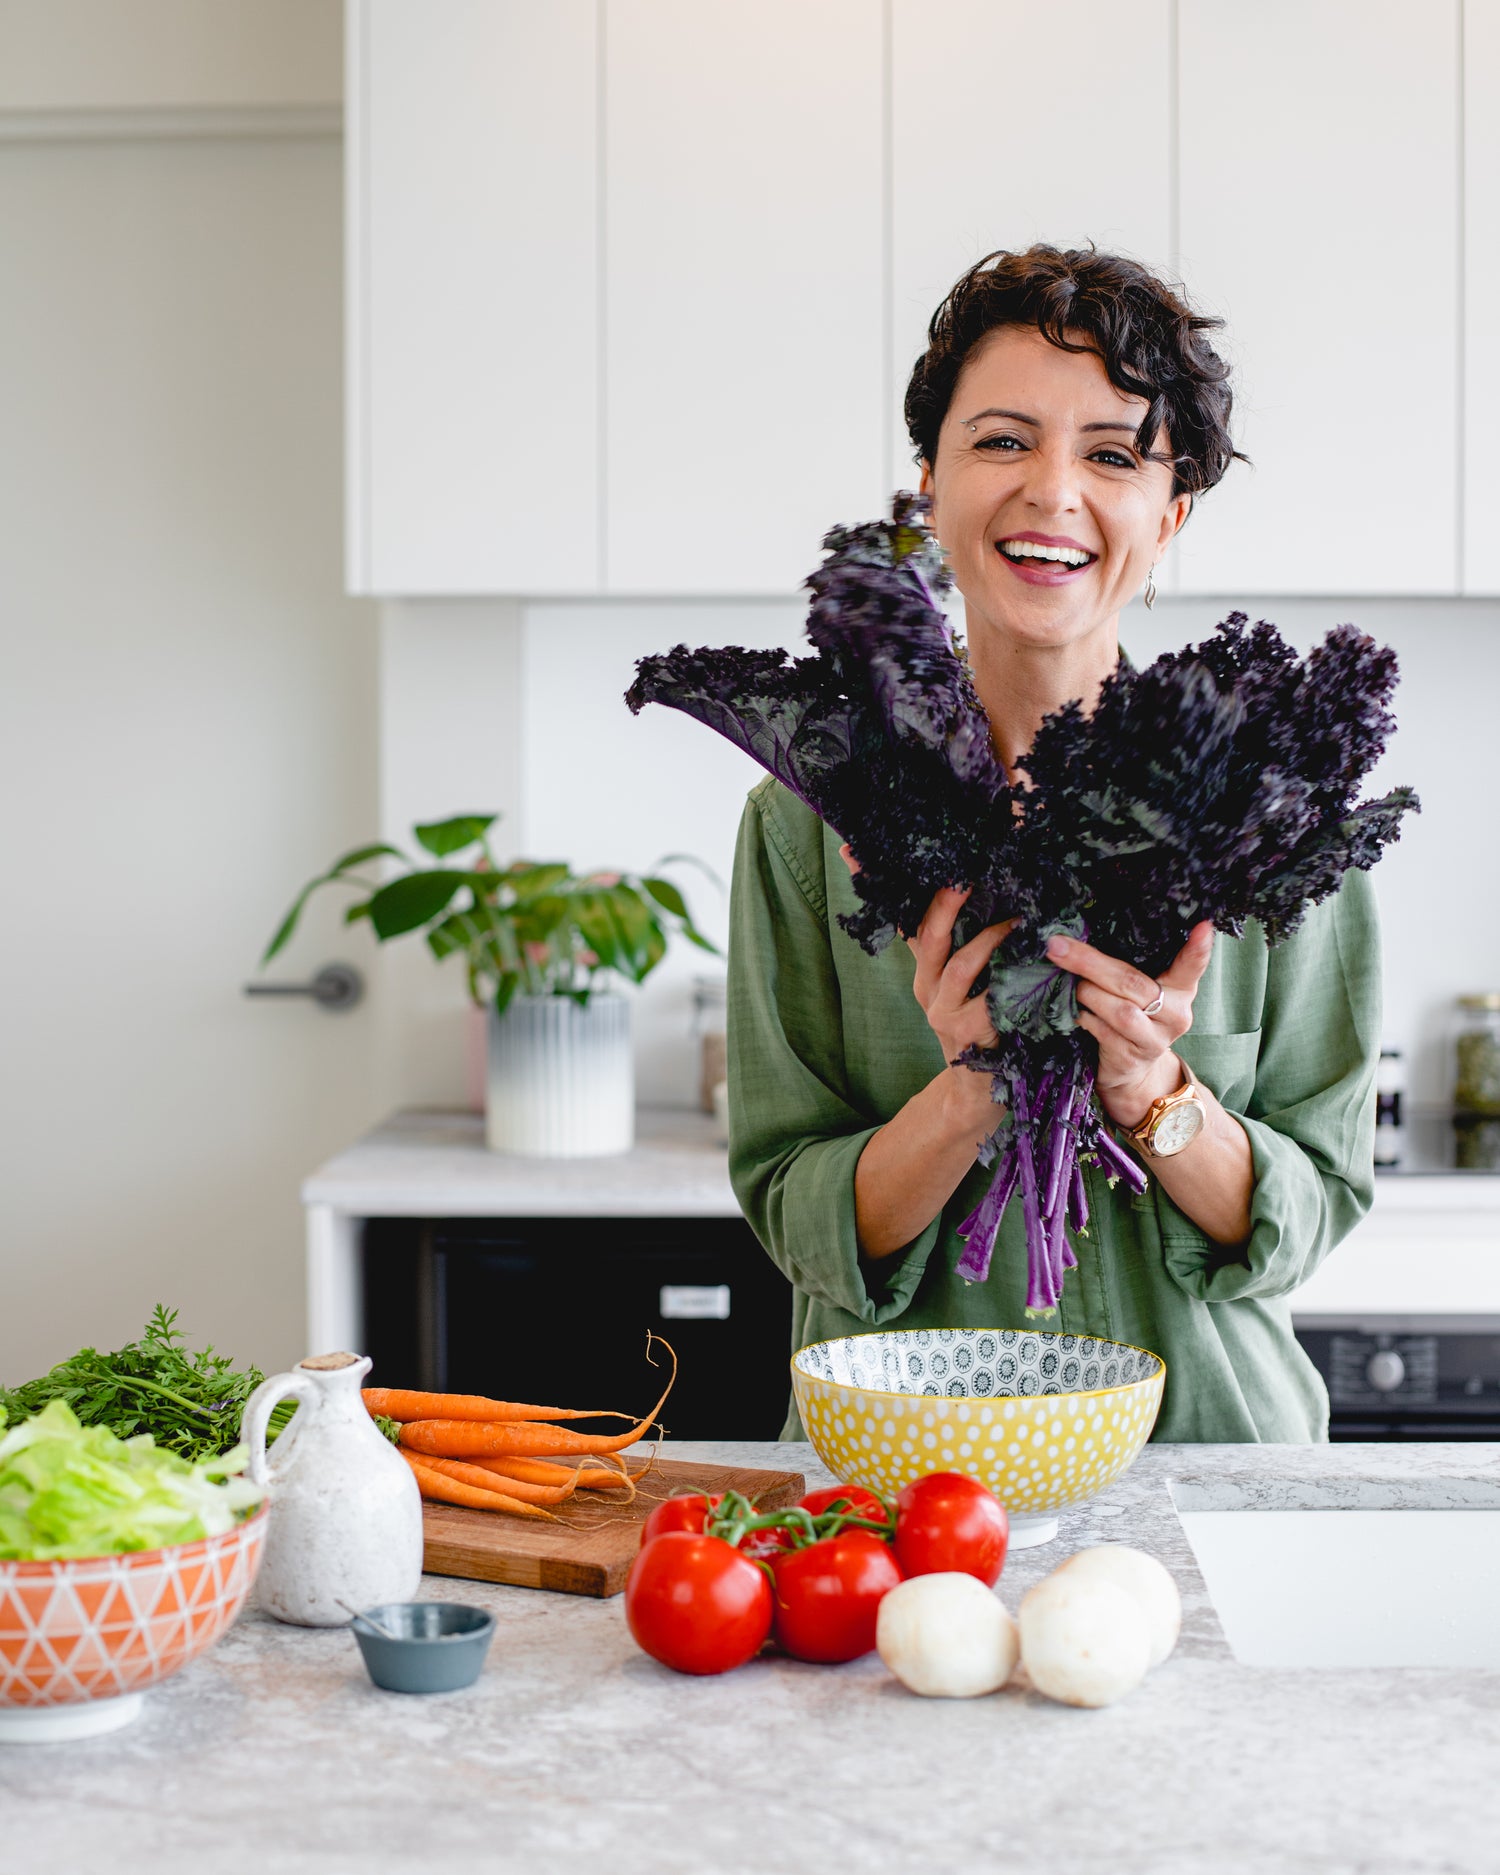 White woman holding lettuce in her hand in a kitchen with a table full of healthy and nutritious foods, including tomatoes and carrots.